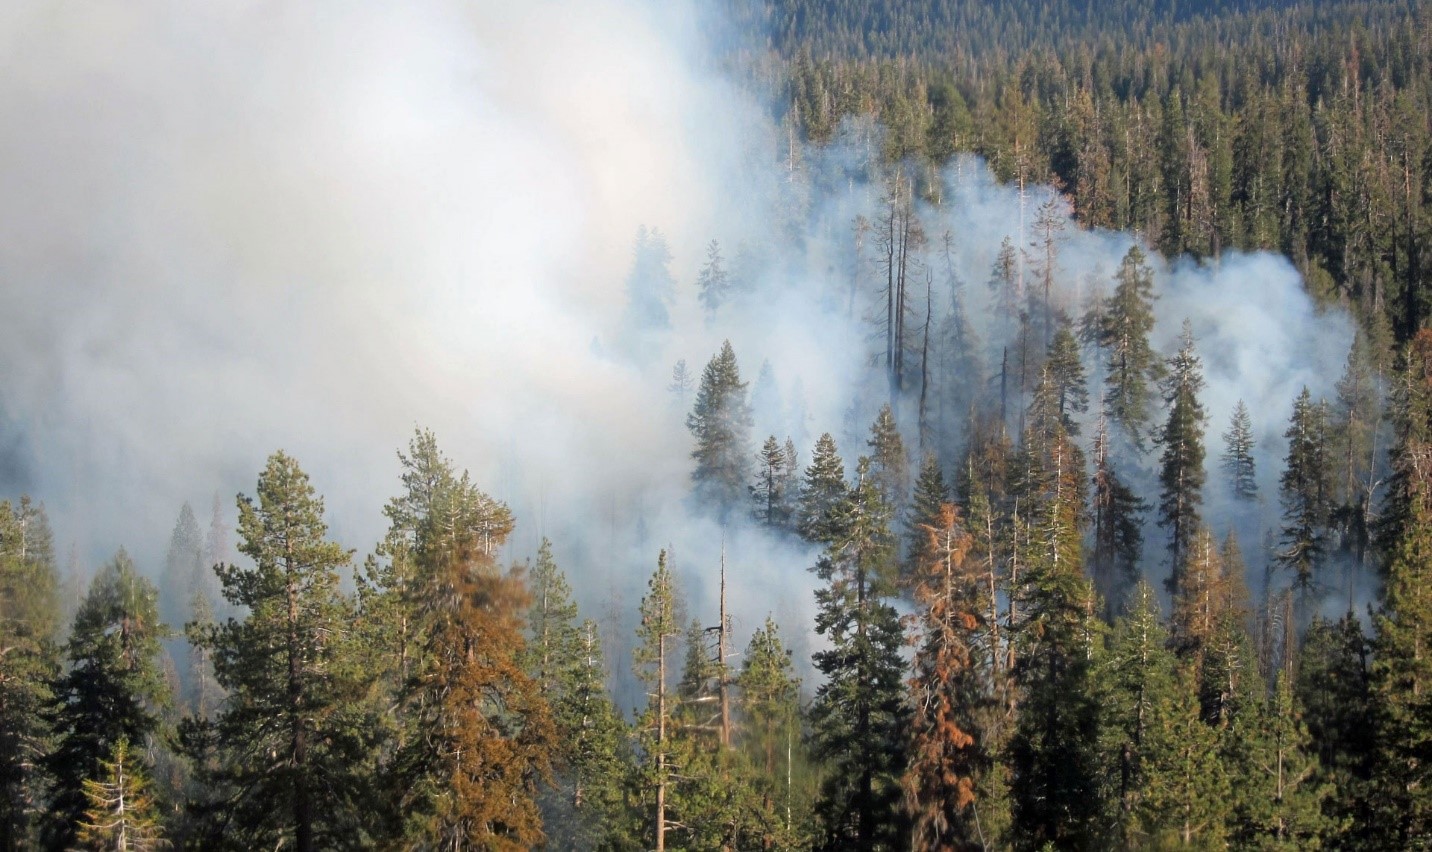 Authorities monitored this wildfire as it burned along the forest floor without torching the treetops (source: US Forest Service).